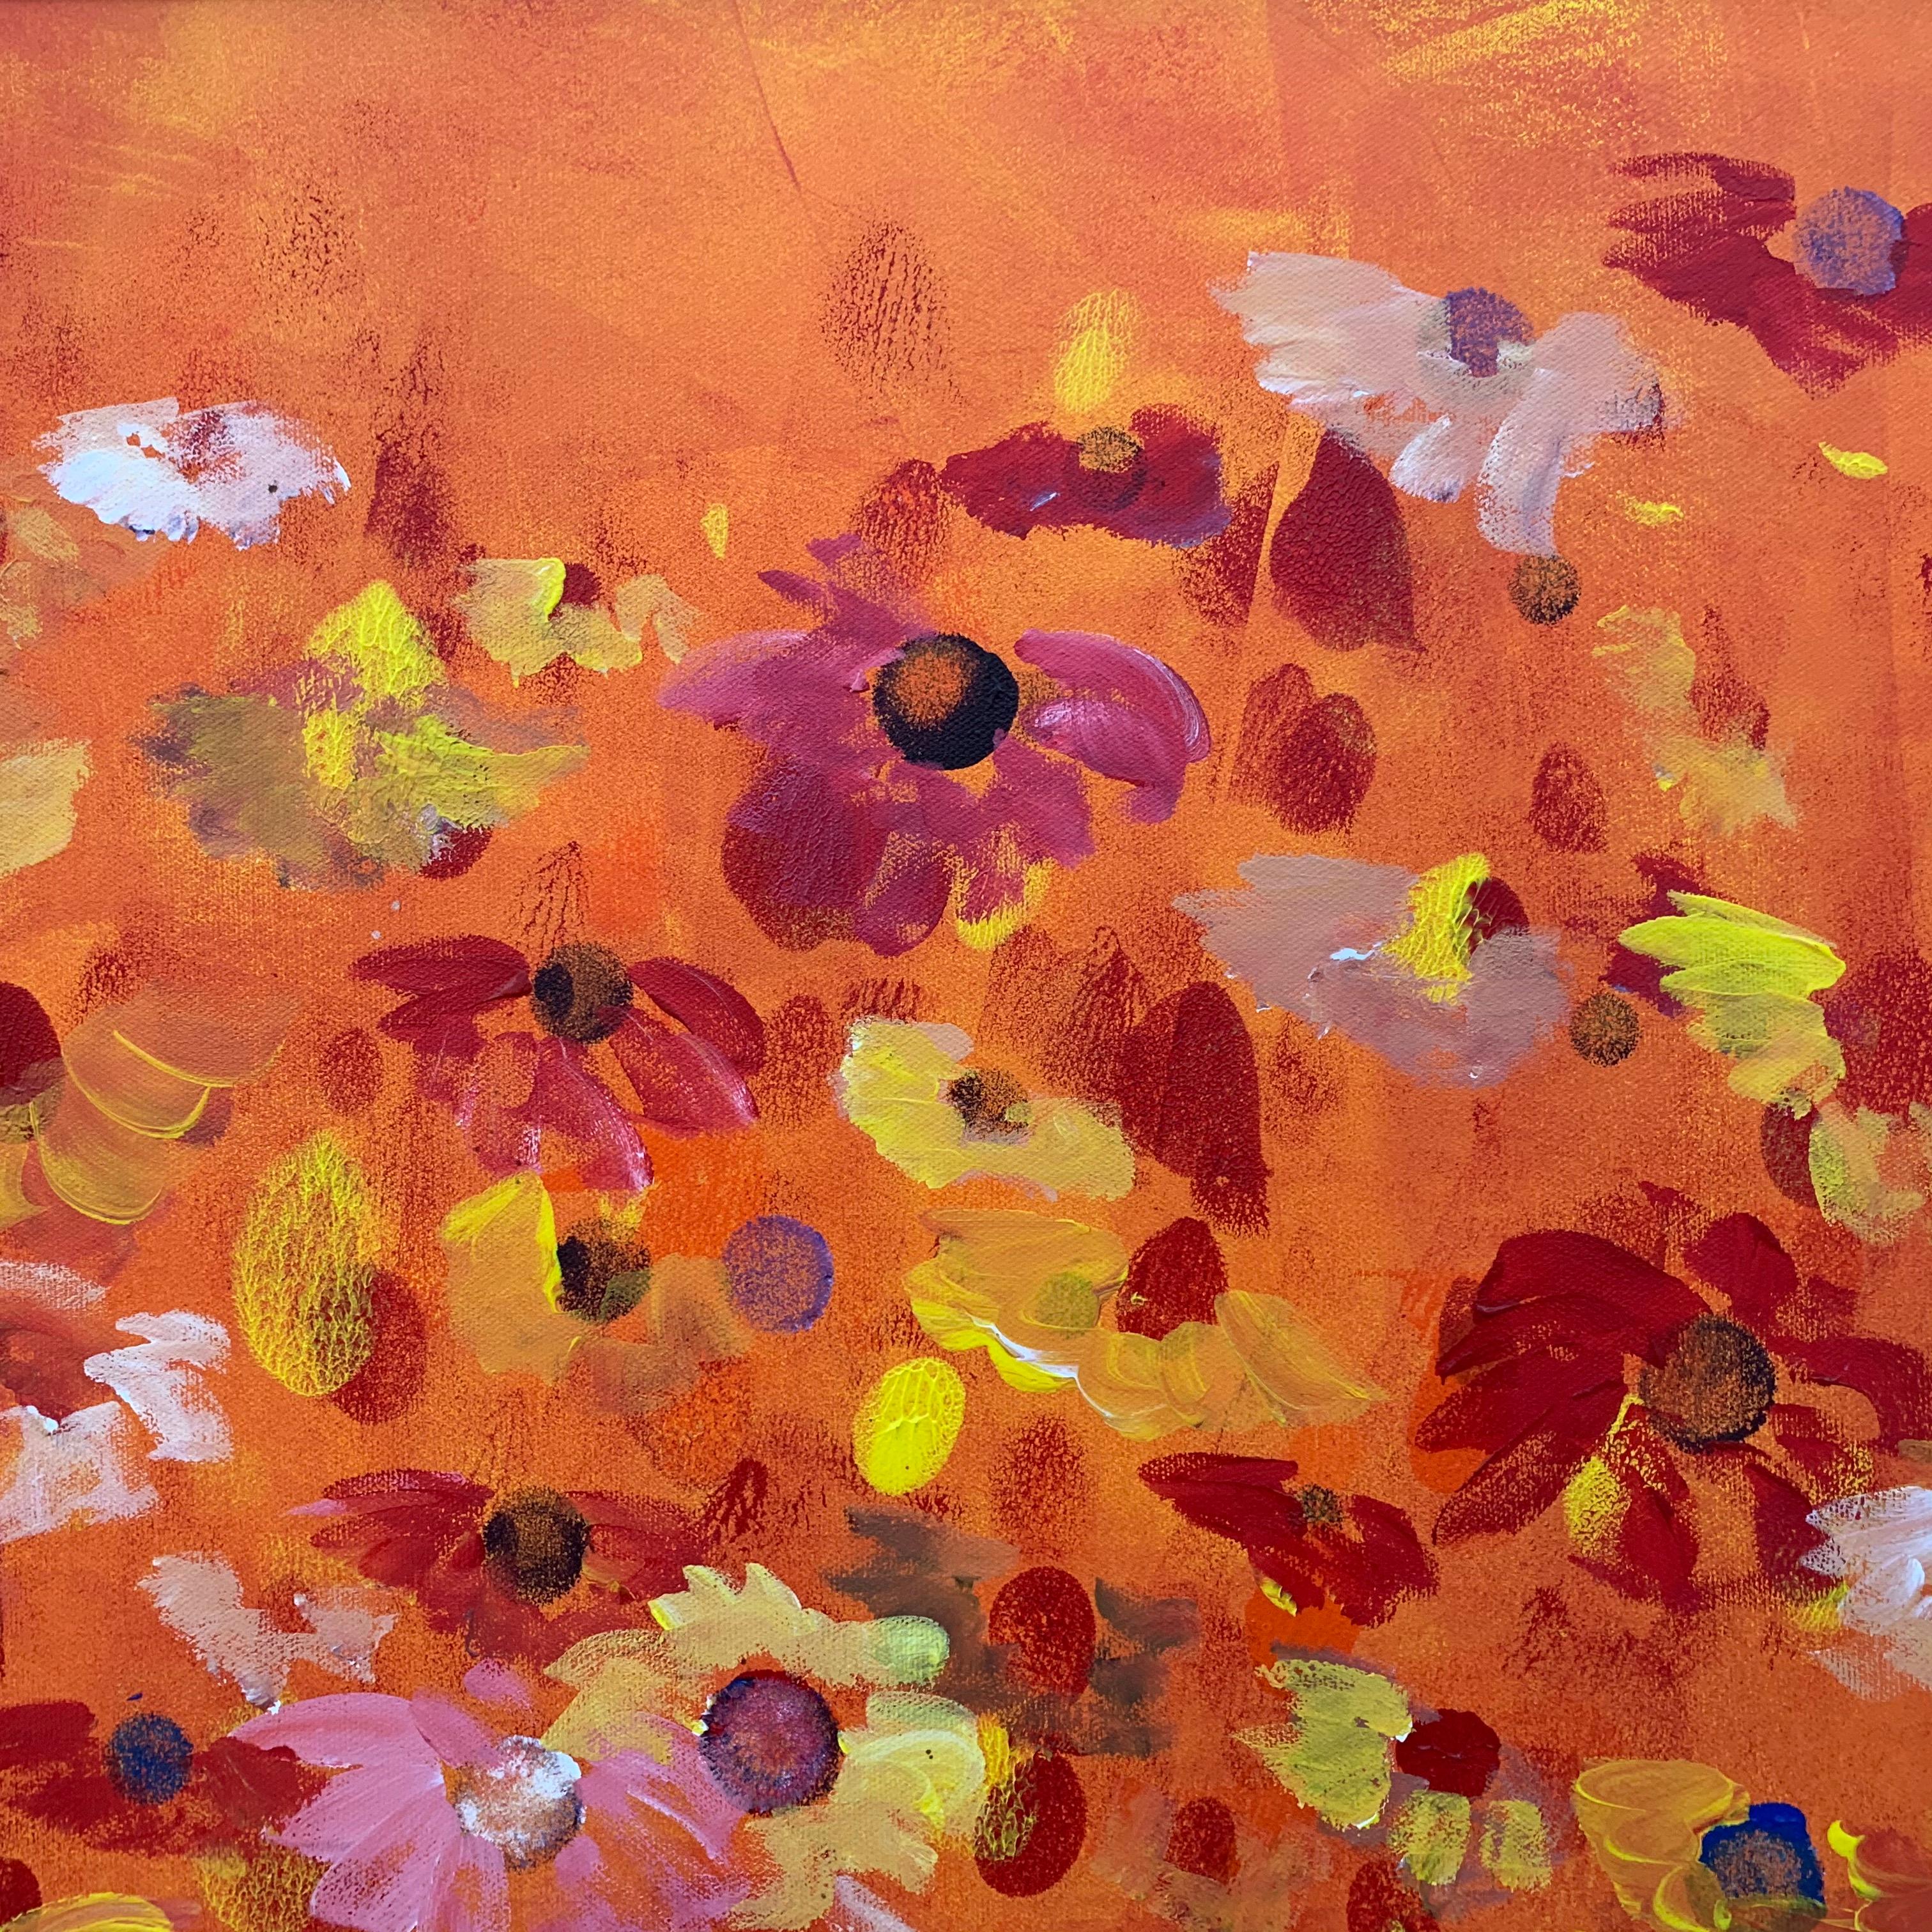 Painting of Abstract Red, Pink, Yellow & White Wild Flowers on an Orange Background by British Contemporary Artist, Angela Wakefield. From the 'Spring Burst' Interior Design Series. Framed in a high quality contemporary off-black wooden moulding.